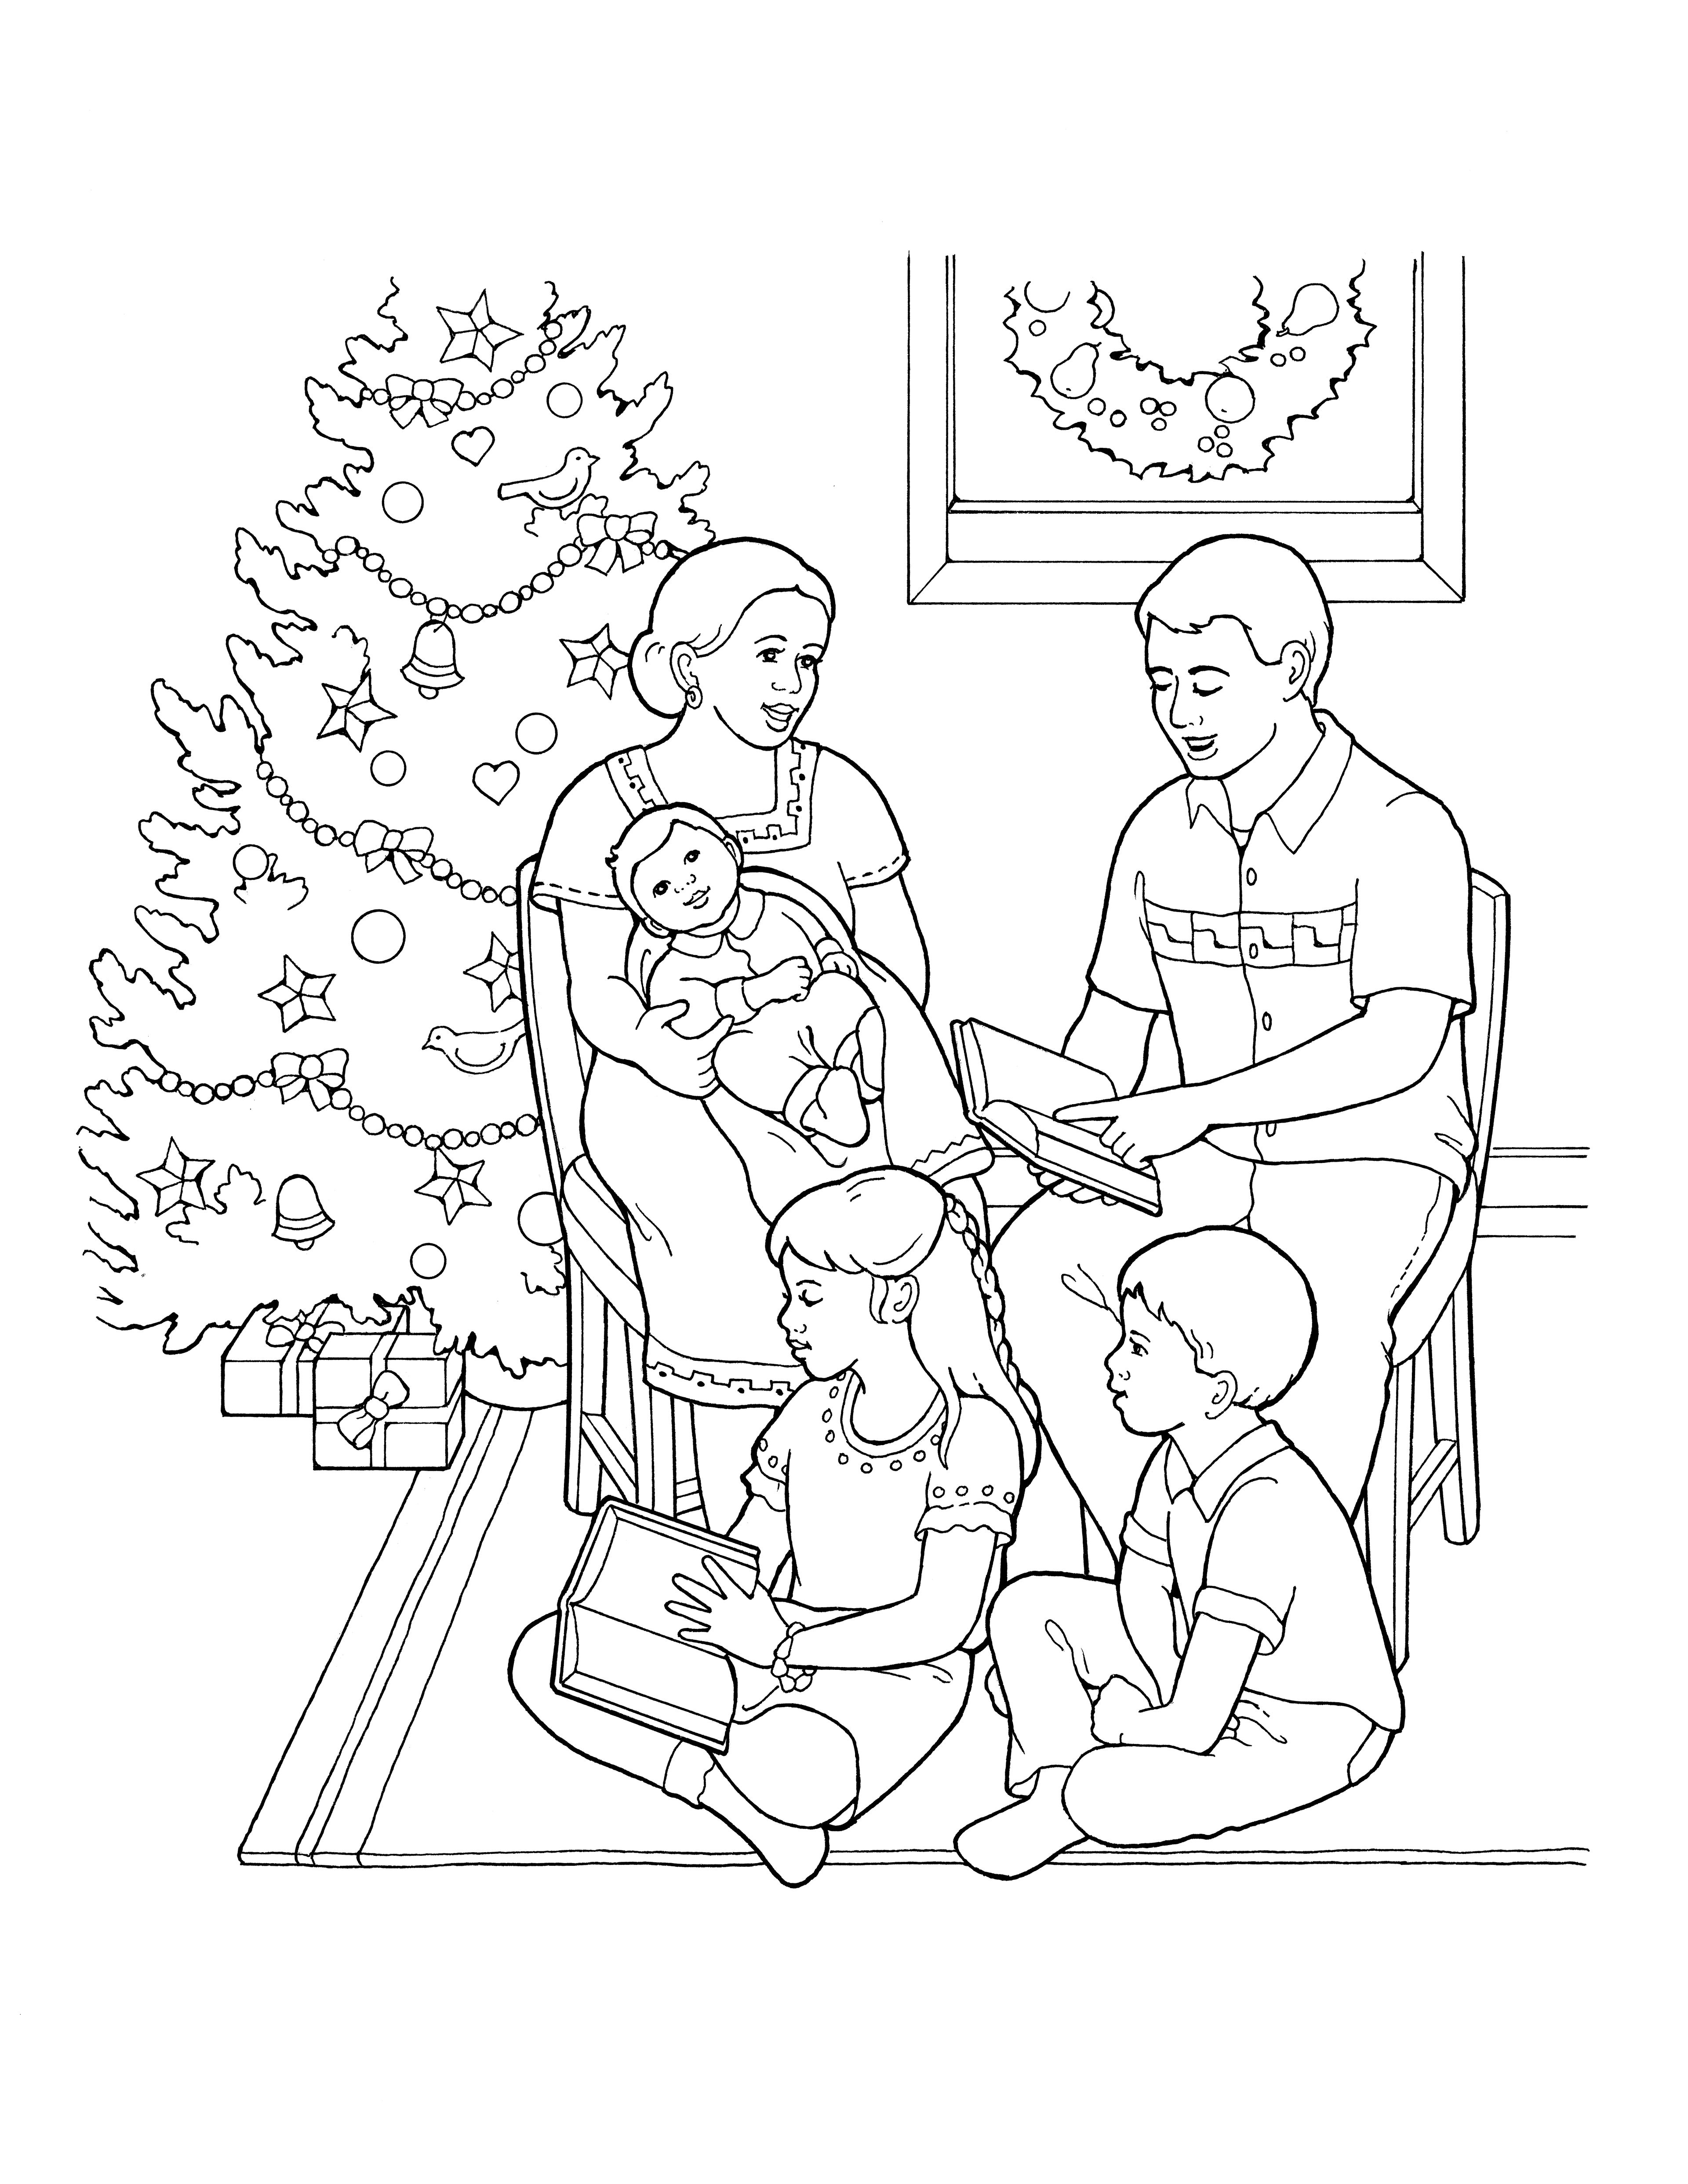 An illustration of a family sitting around a Christmas tree, reading about the Nativity.